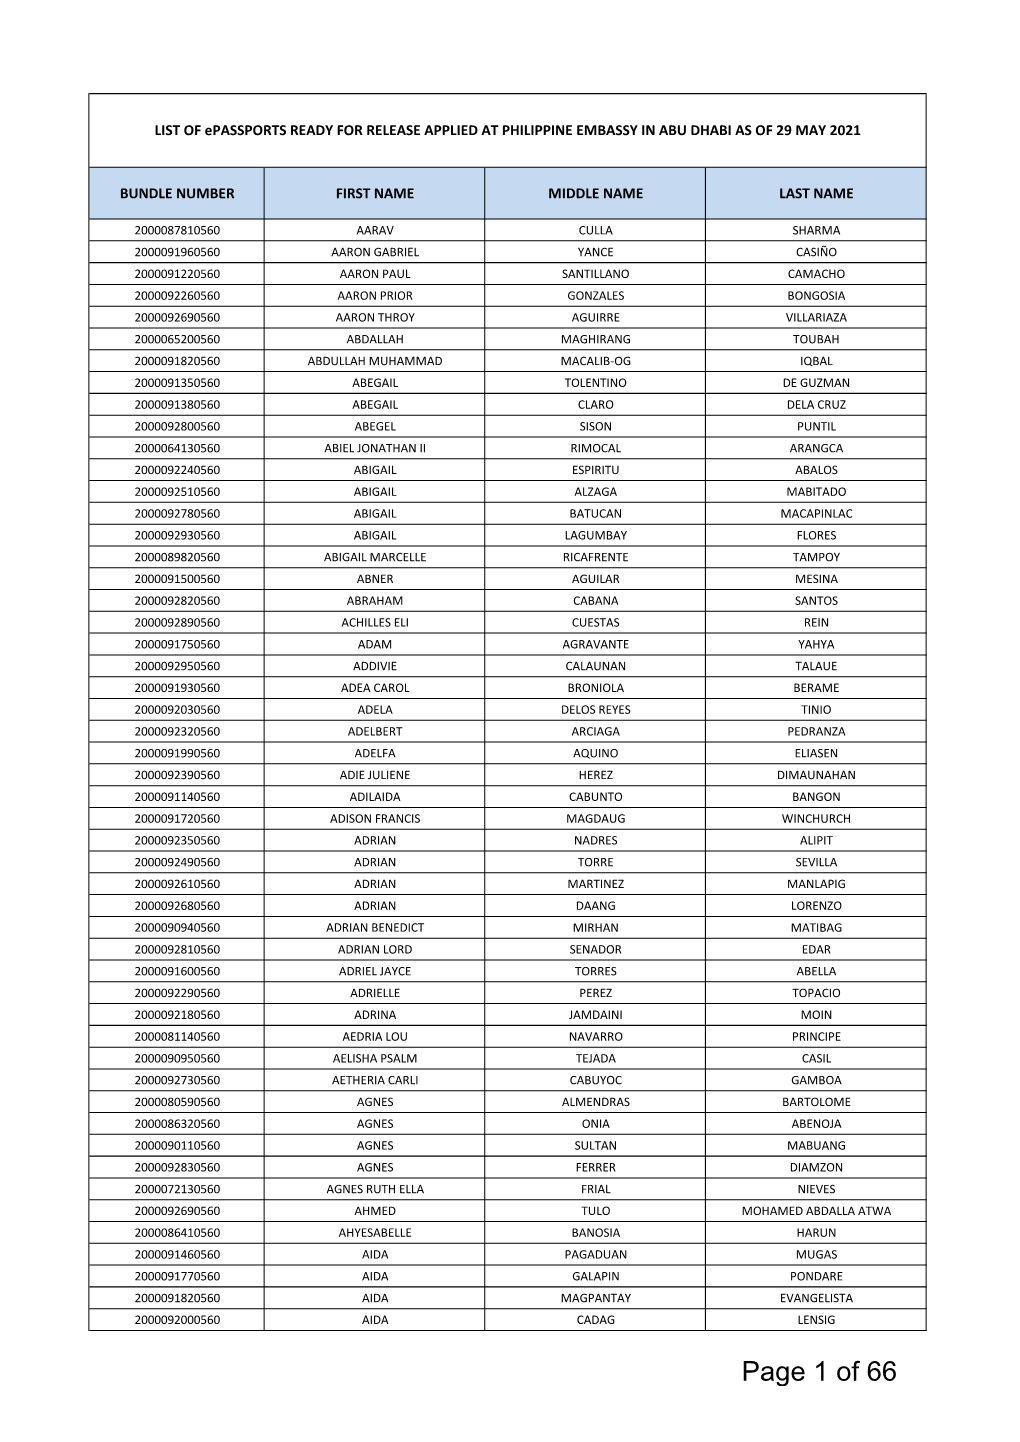 Of 66 LIST of Epassports READY for RELEASE APPLIED at PHILIPPINE EMBASSY in ABU DHABI AS of 29 MAY 2021